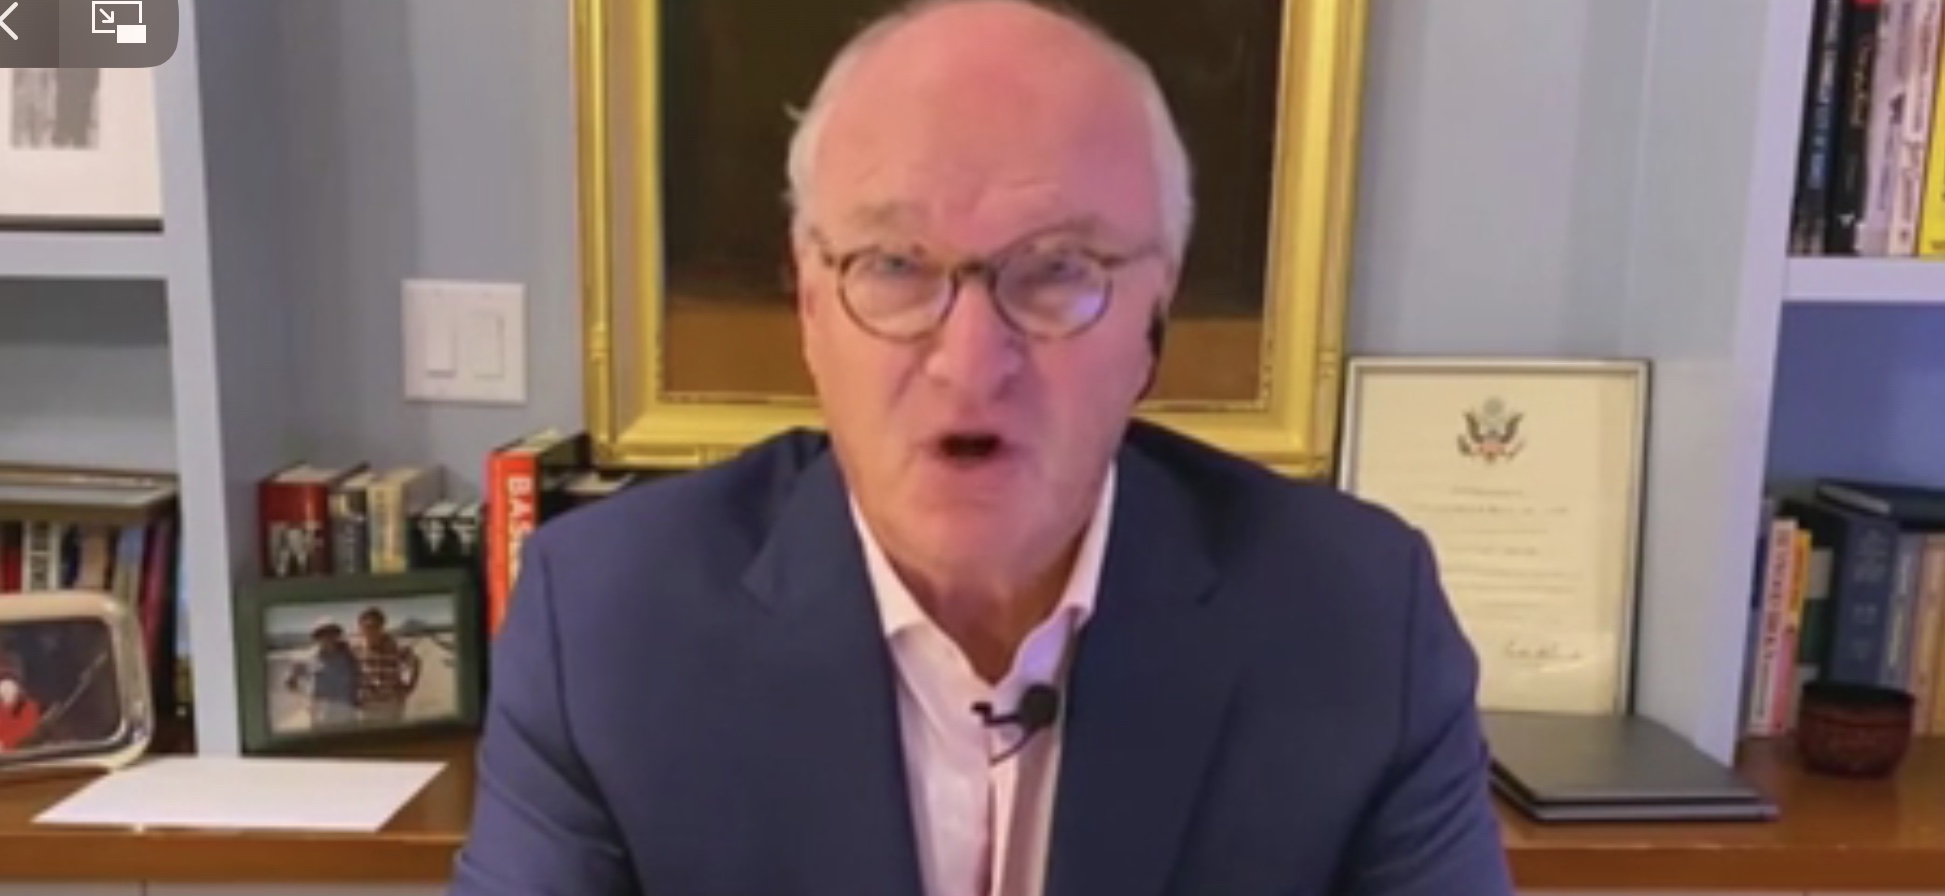 ‘Pray That There’s Going To Be A Landslide For Joe Biden,’ MSNBC Contributor Mike Barnicle Says thumbnail